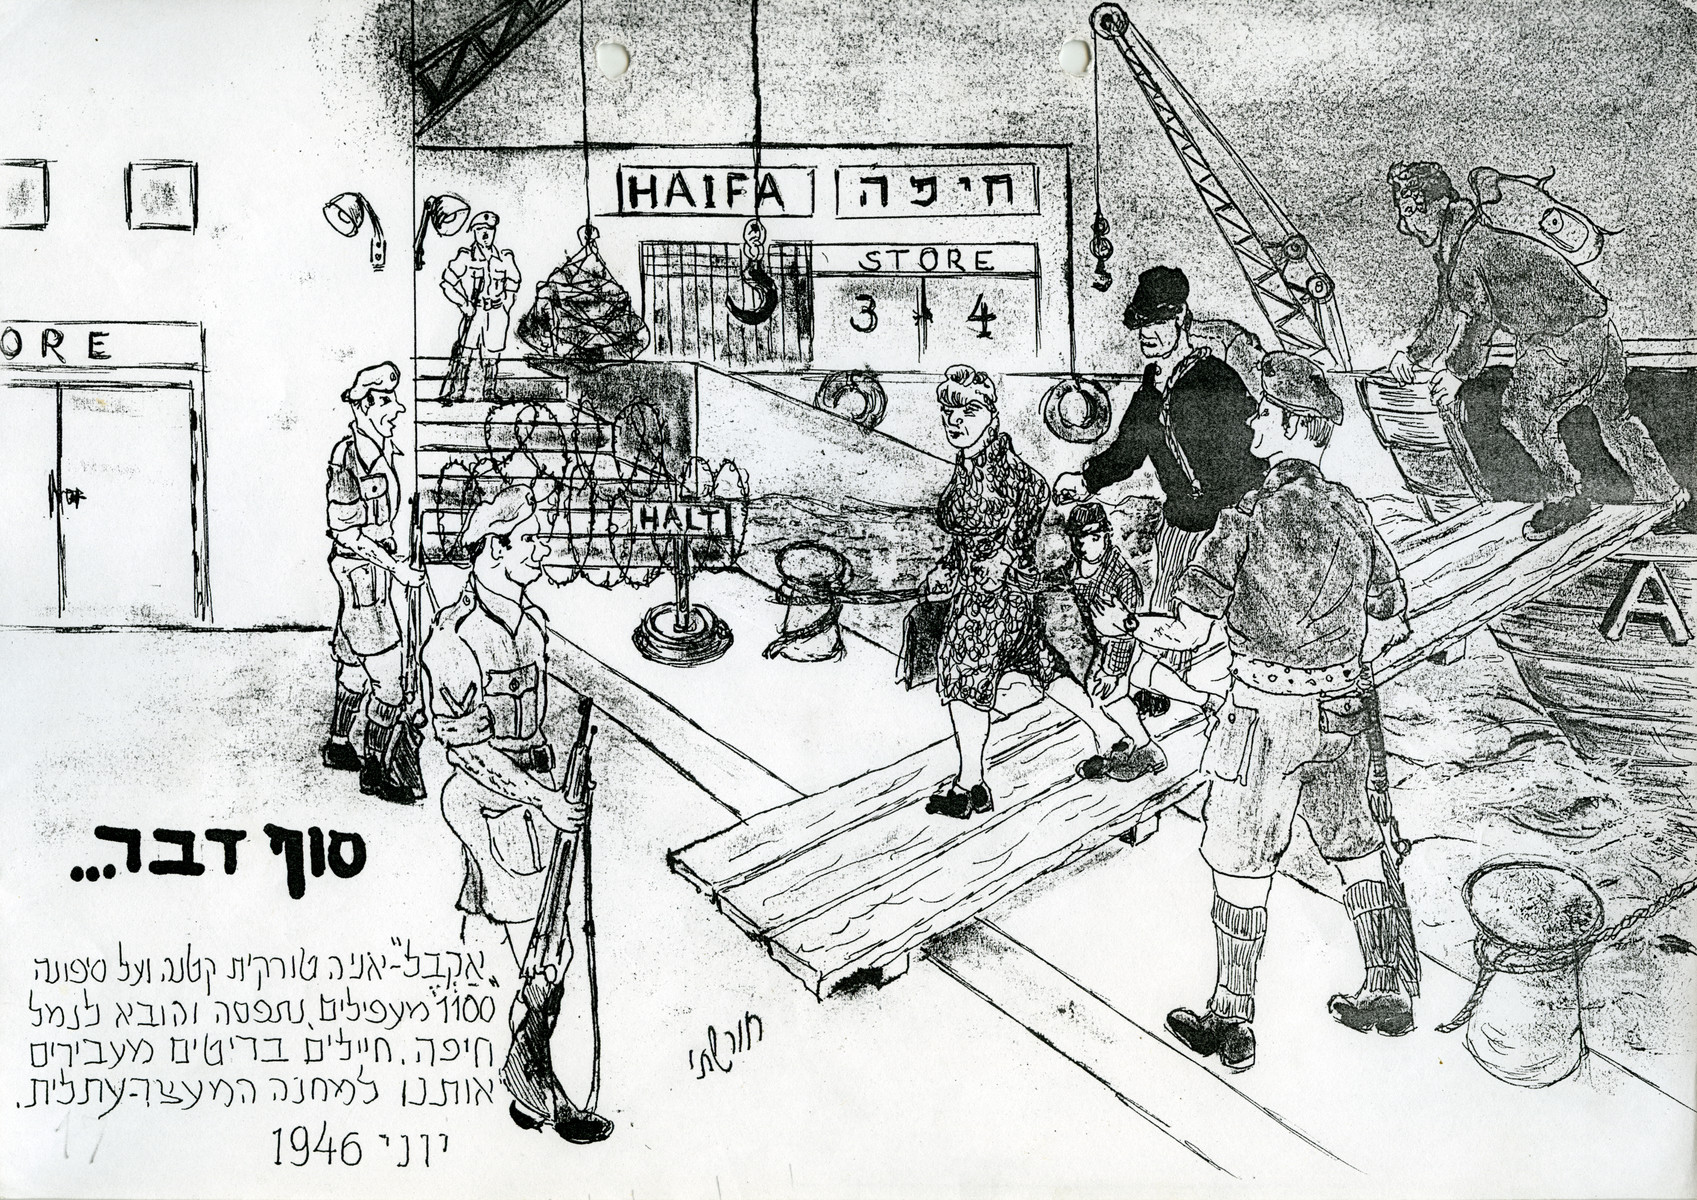 Page of a pictoral memoir drawn by the donor documenting his experiences after the Holocaust.

The drawing depicts armed British soldiers greeting new immigrants upon their arrival in Haifa.  From the port the immigrants were taken to the Athlit detention camp.  [Chronologically this drawing precedes 55102.]